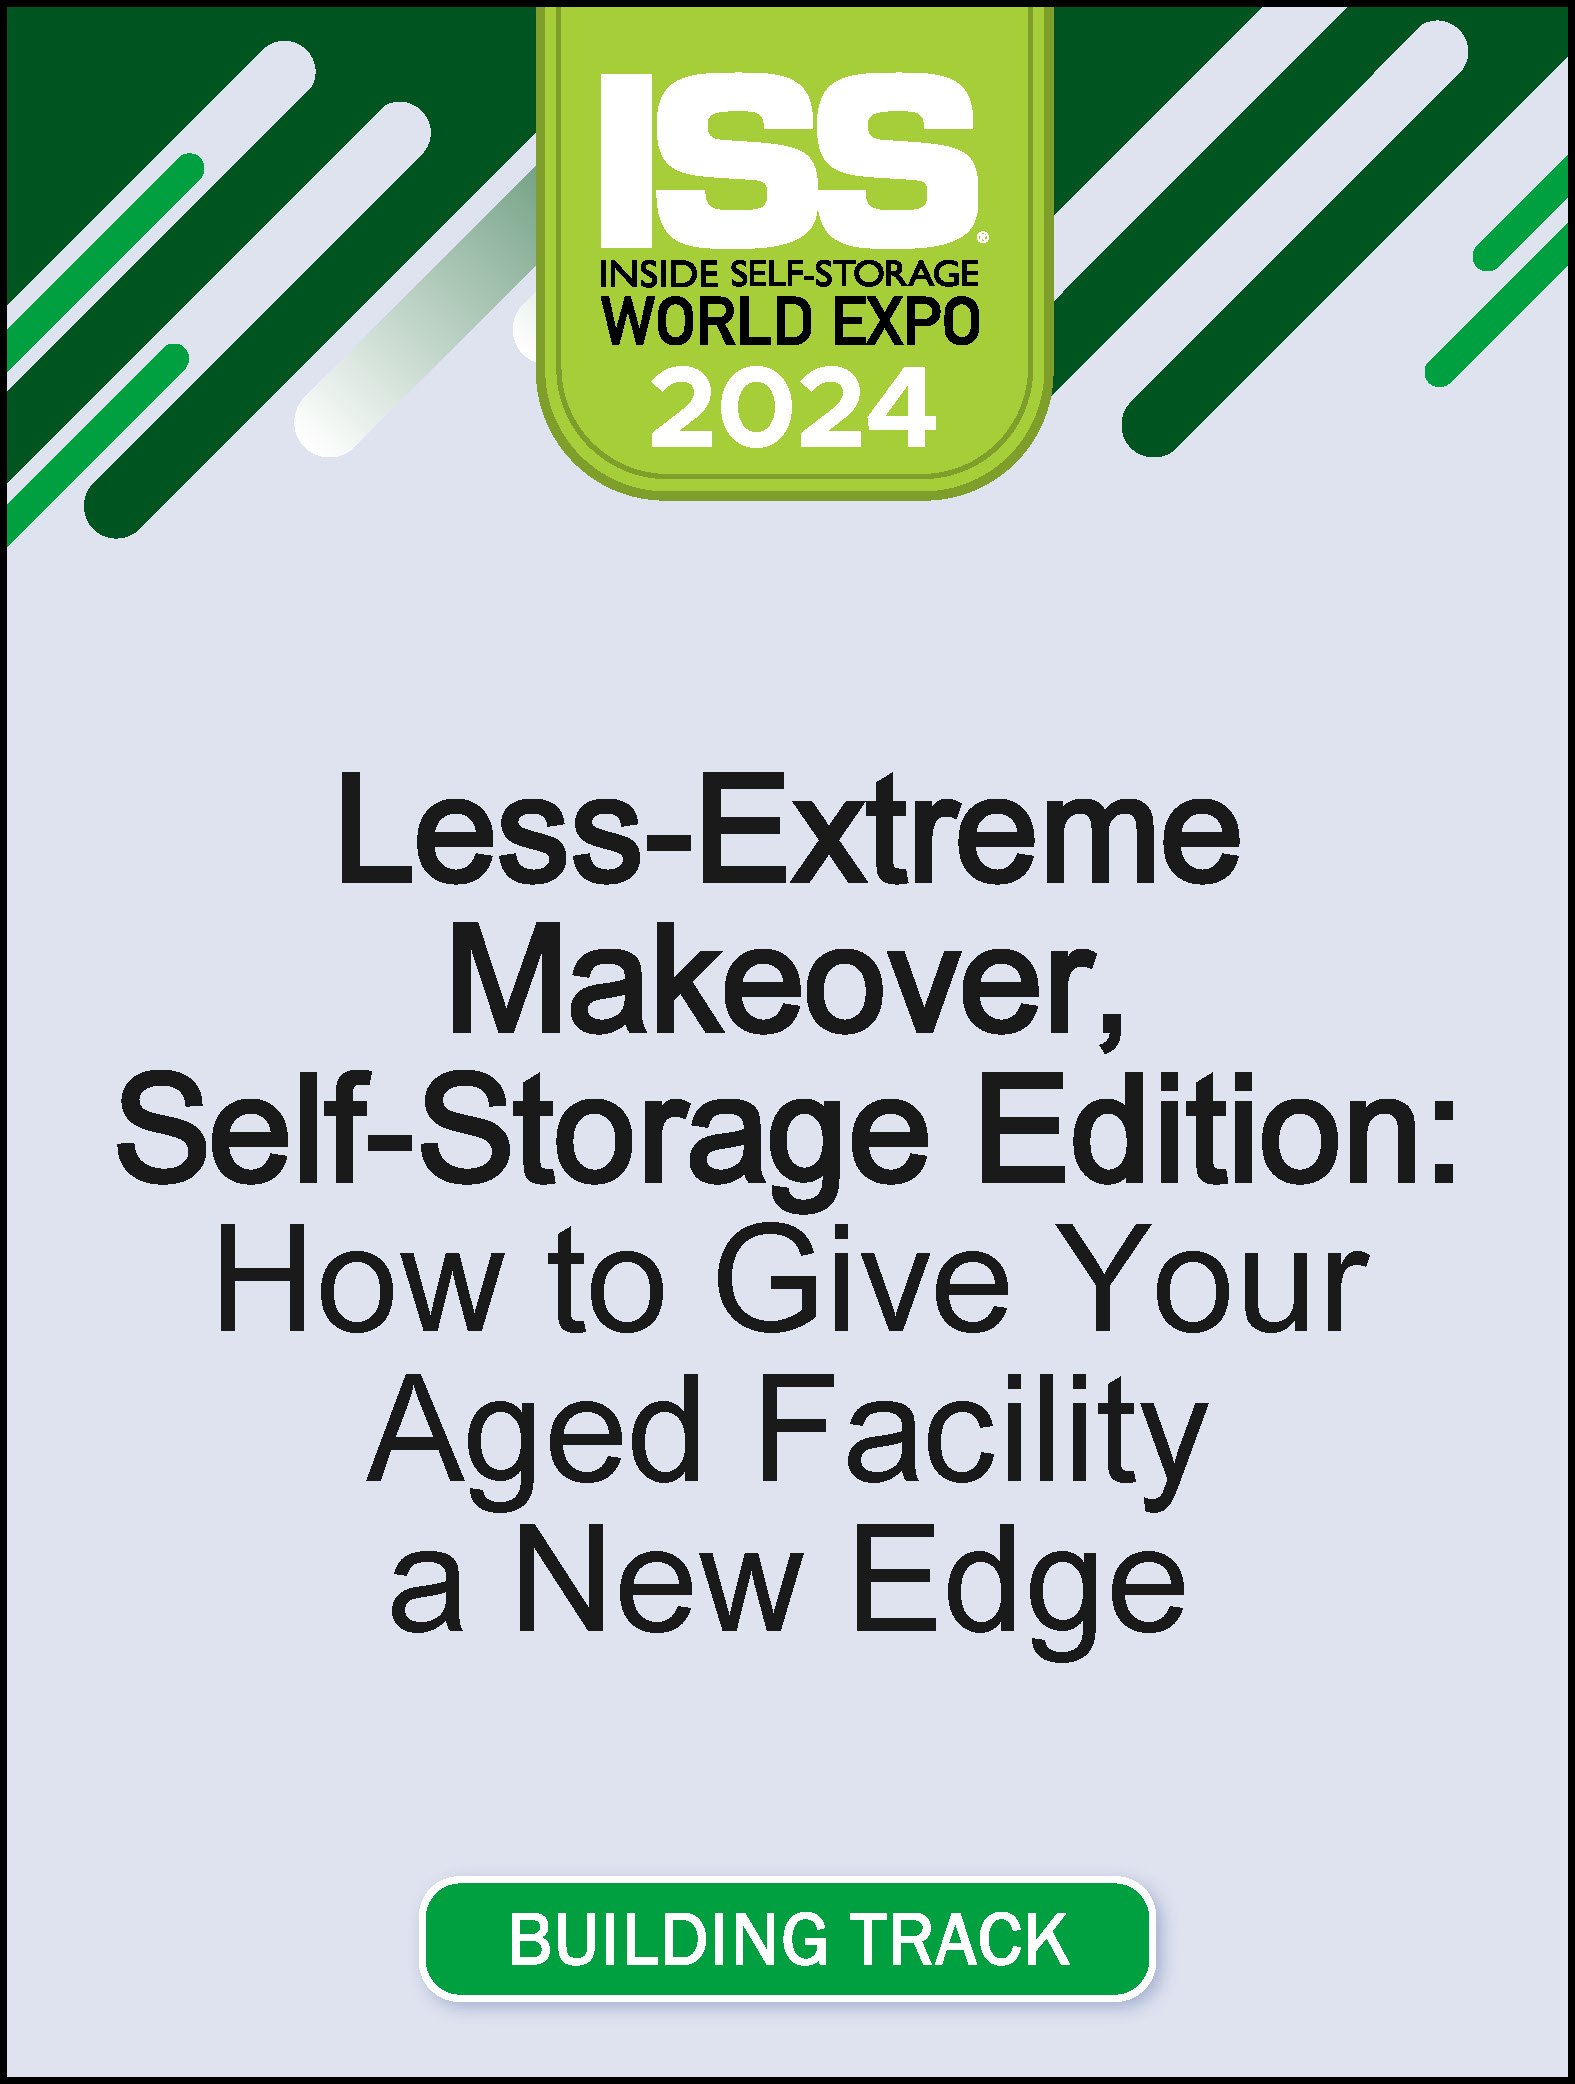 Video Pre-Order - Less-Extreme Makeover, Self-Storage Edition: How to Give Your Aged Facility a New Edge